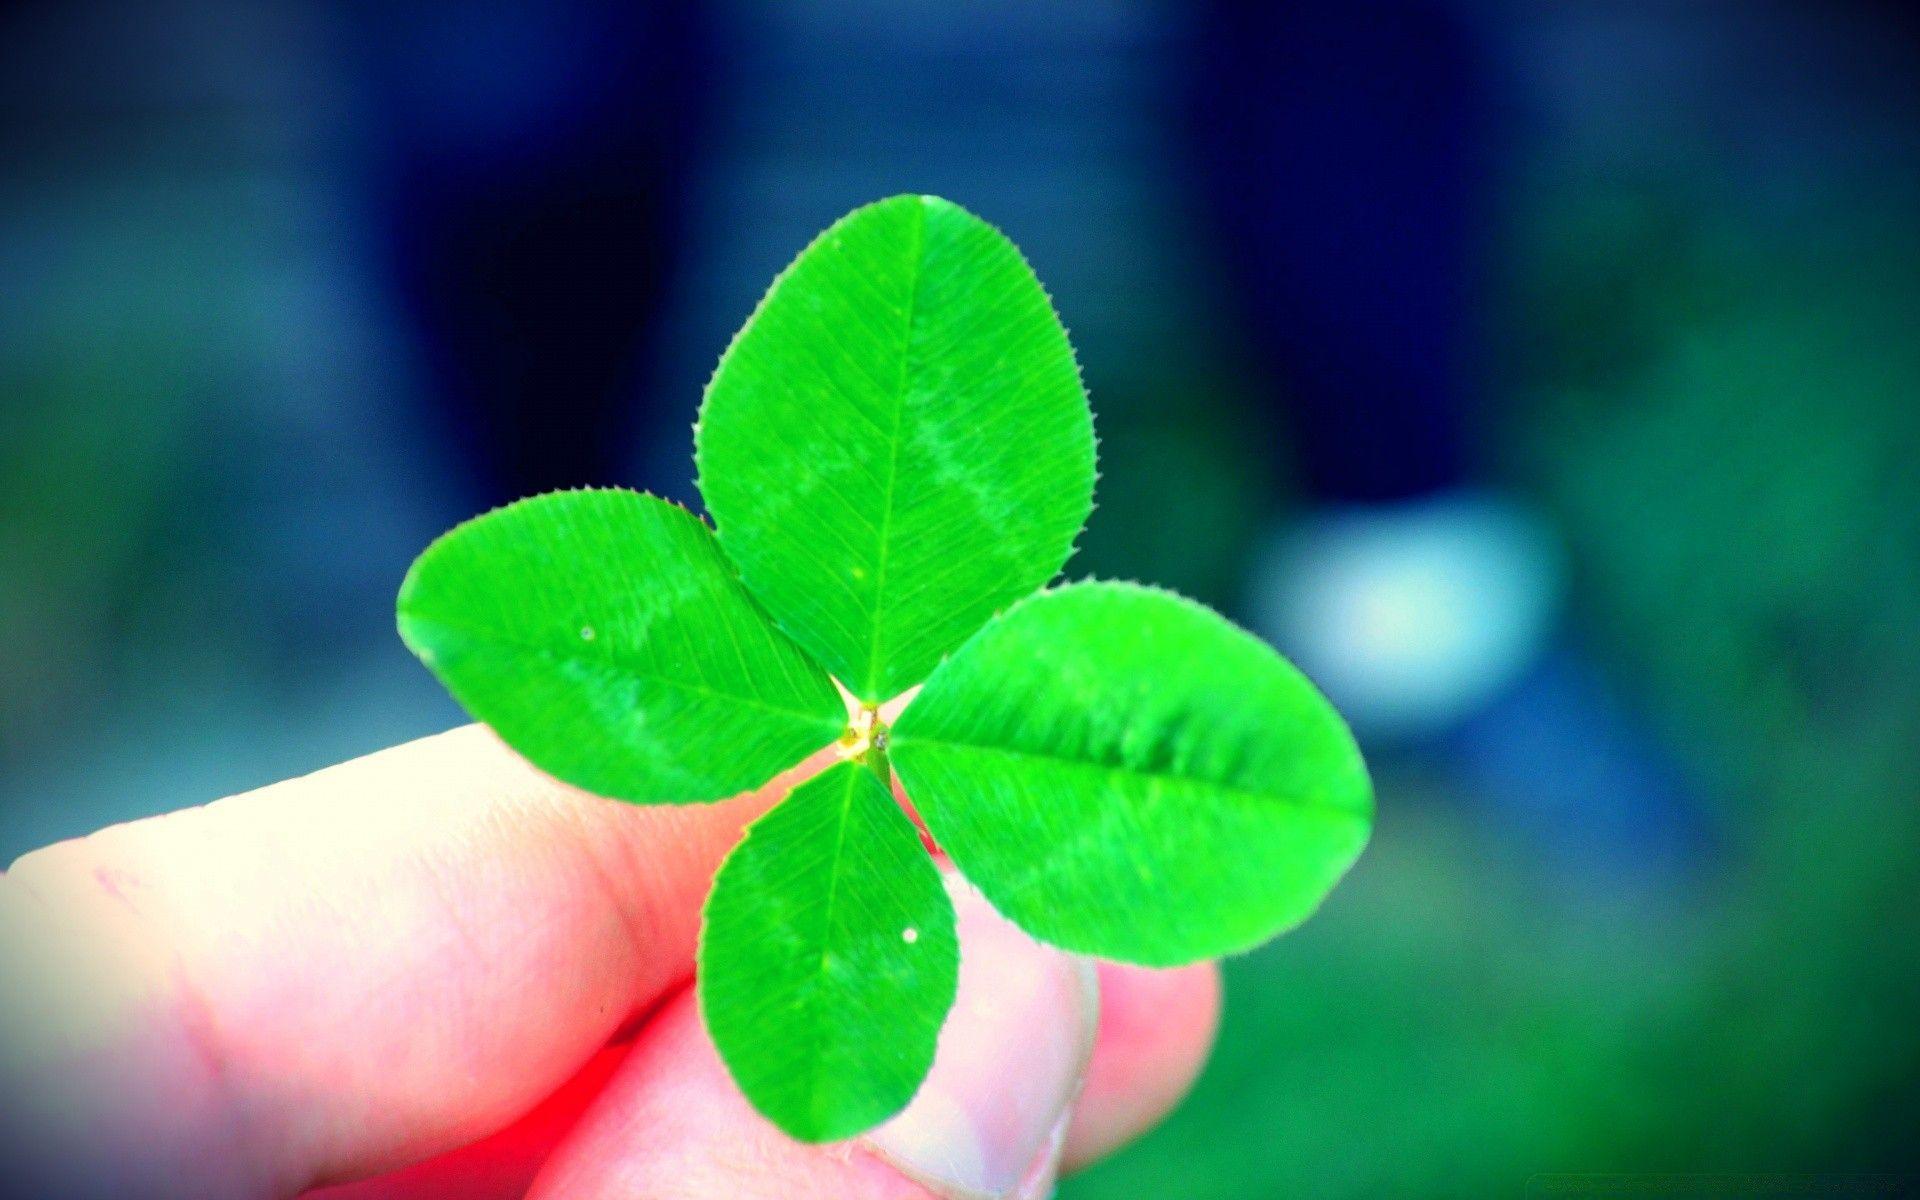 A Four Leaf Clover. Android Wallpaper For Free